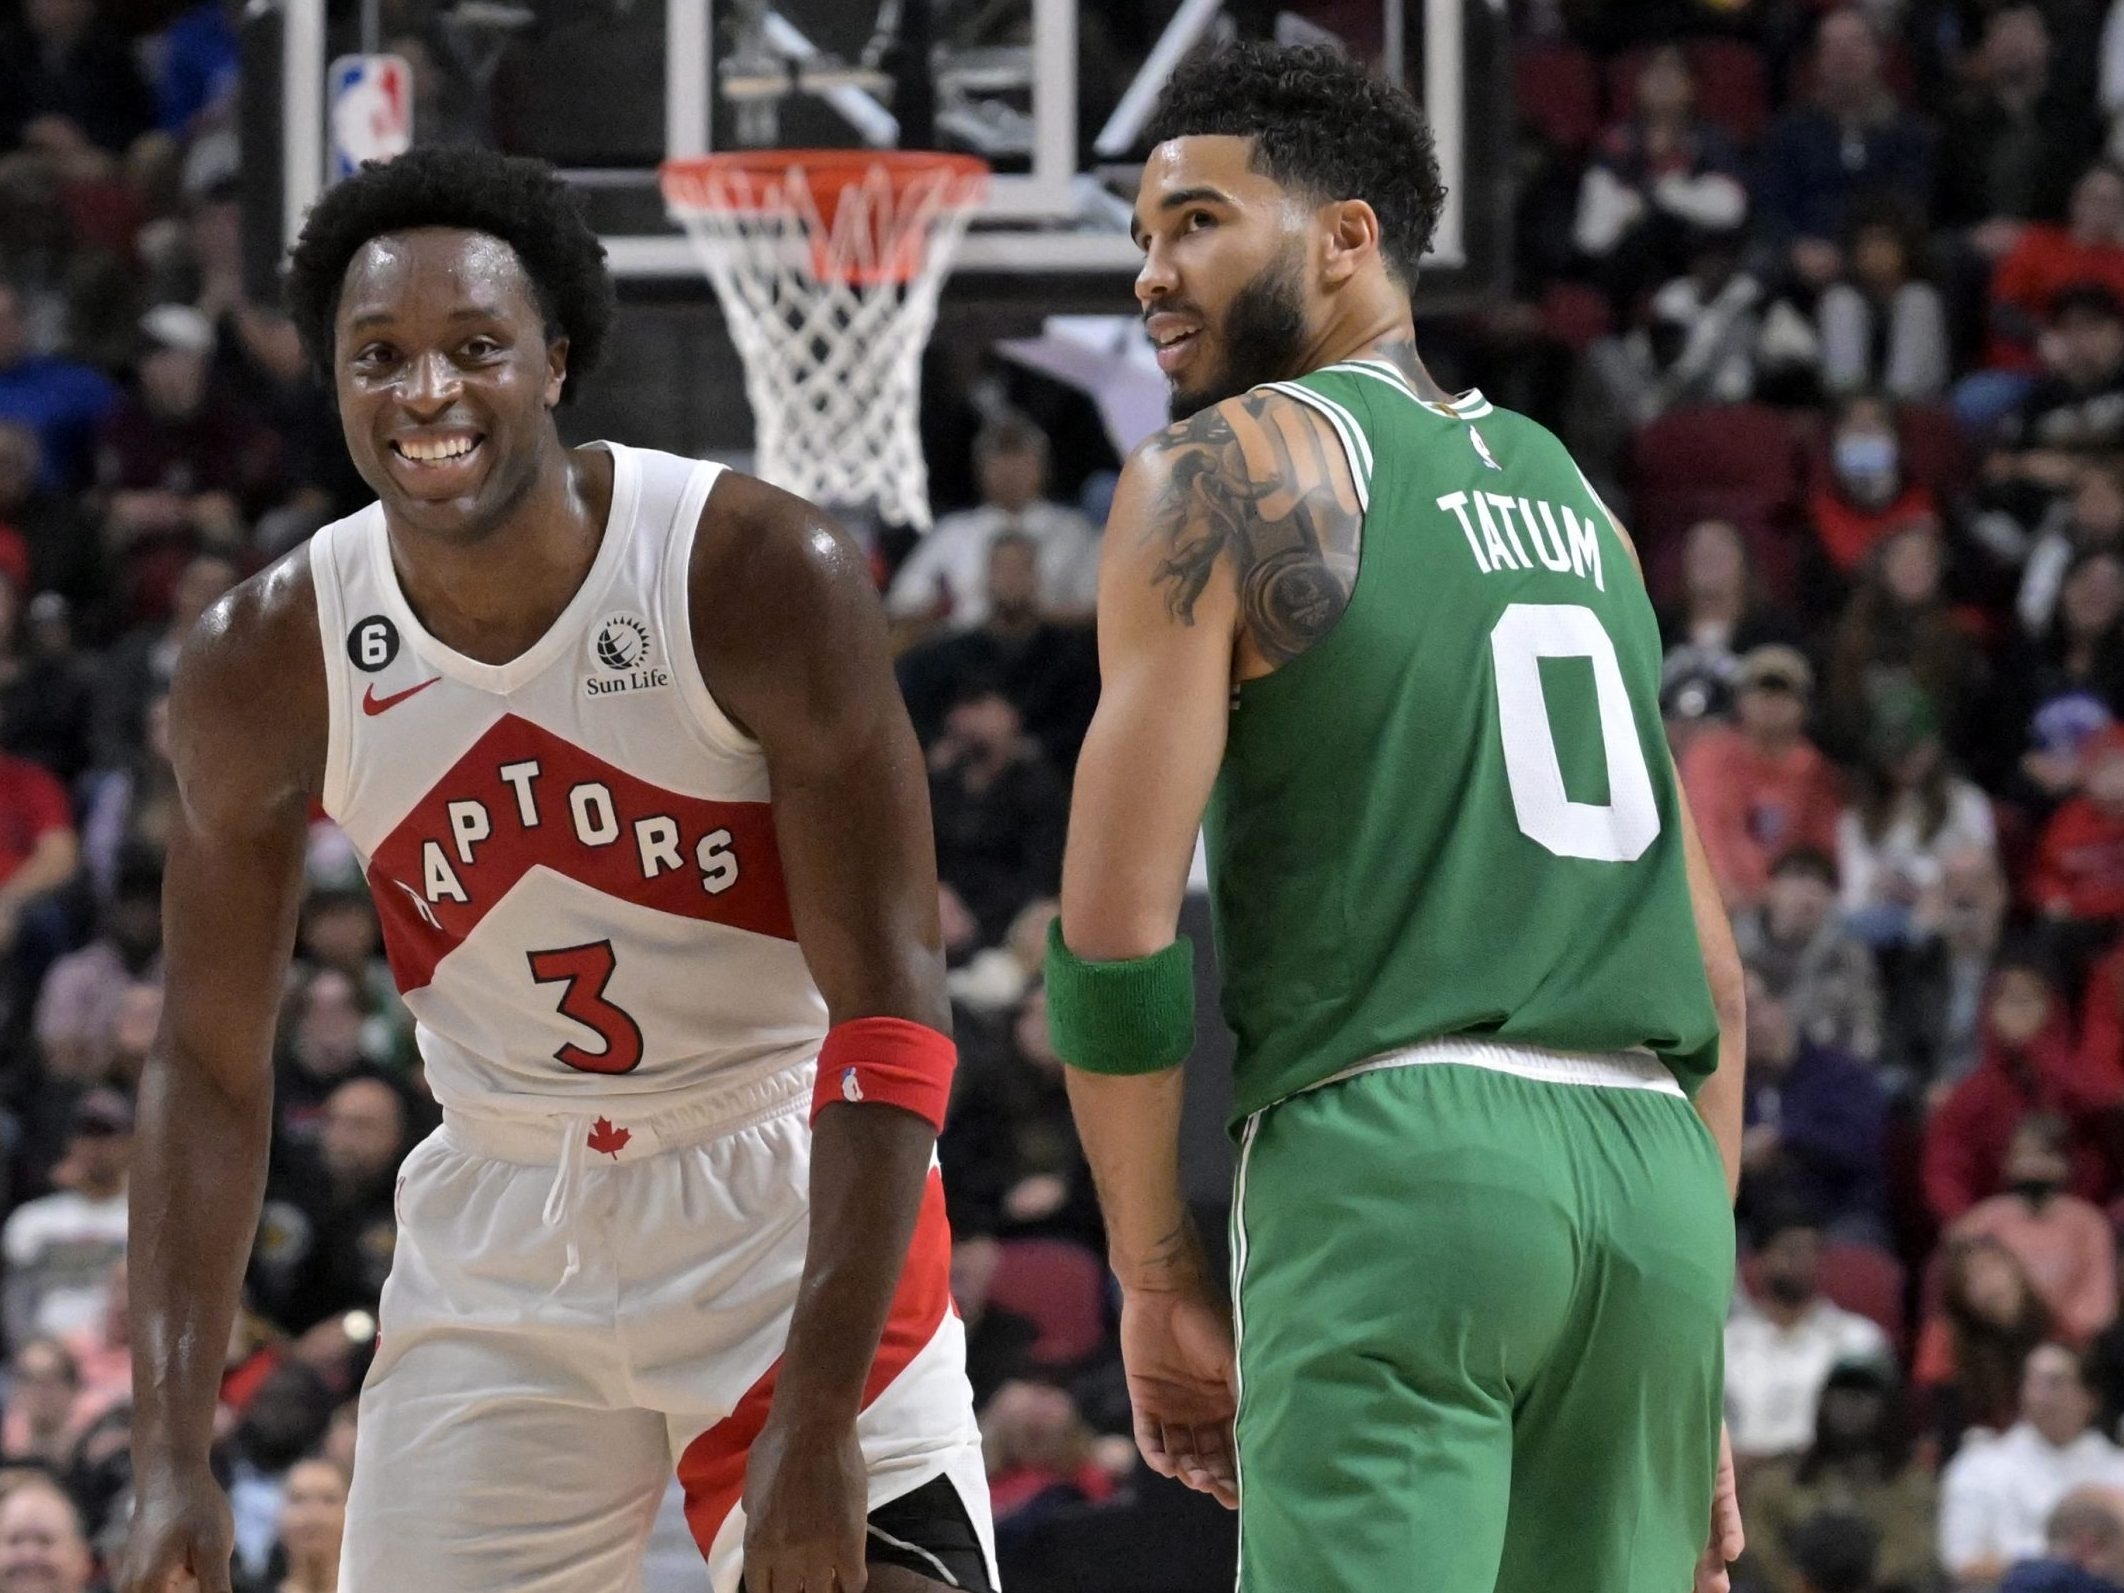 Toronto Raptors: Pros and cons of an OG Anunoby trade